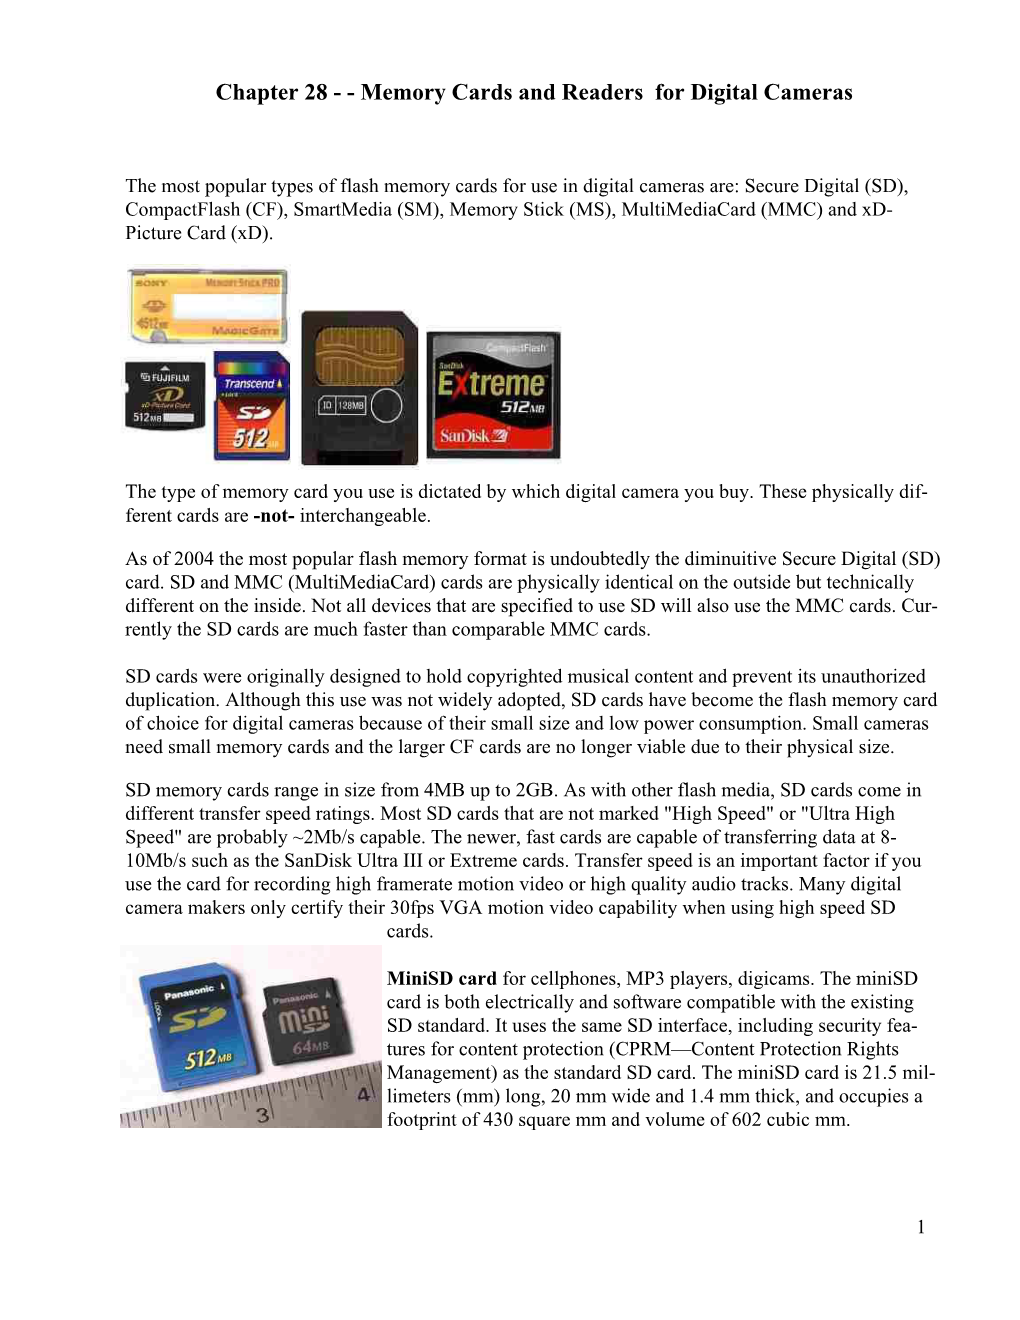 Chapter 28 Memory Cards and Readers for Digital Cameras